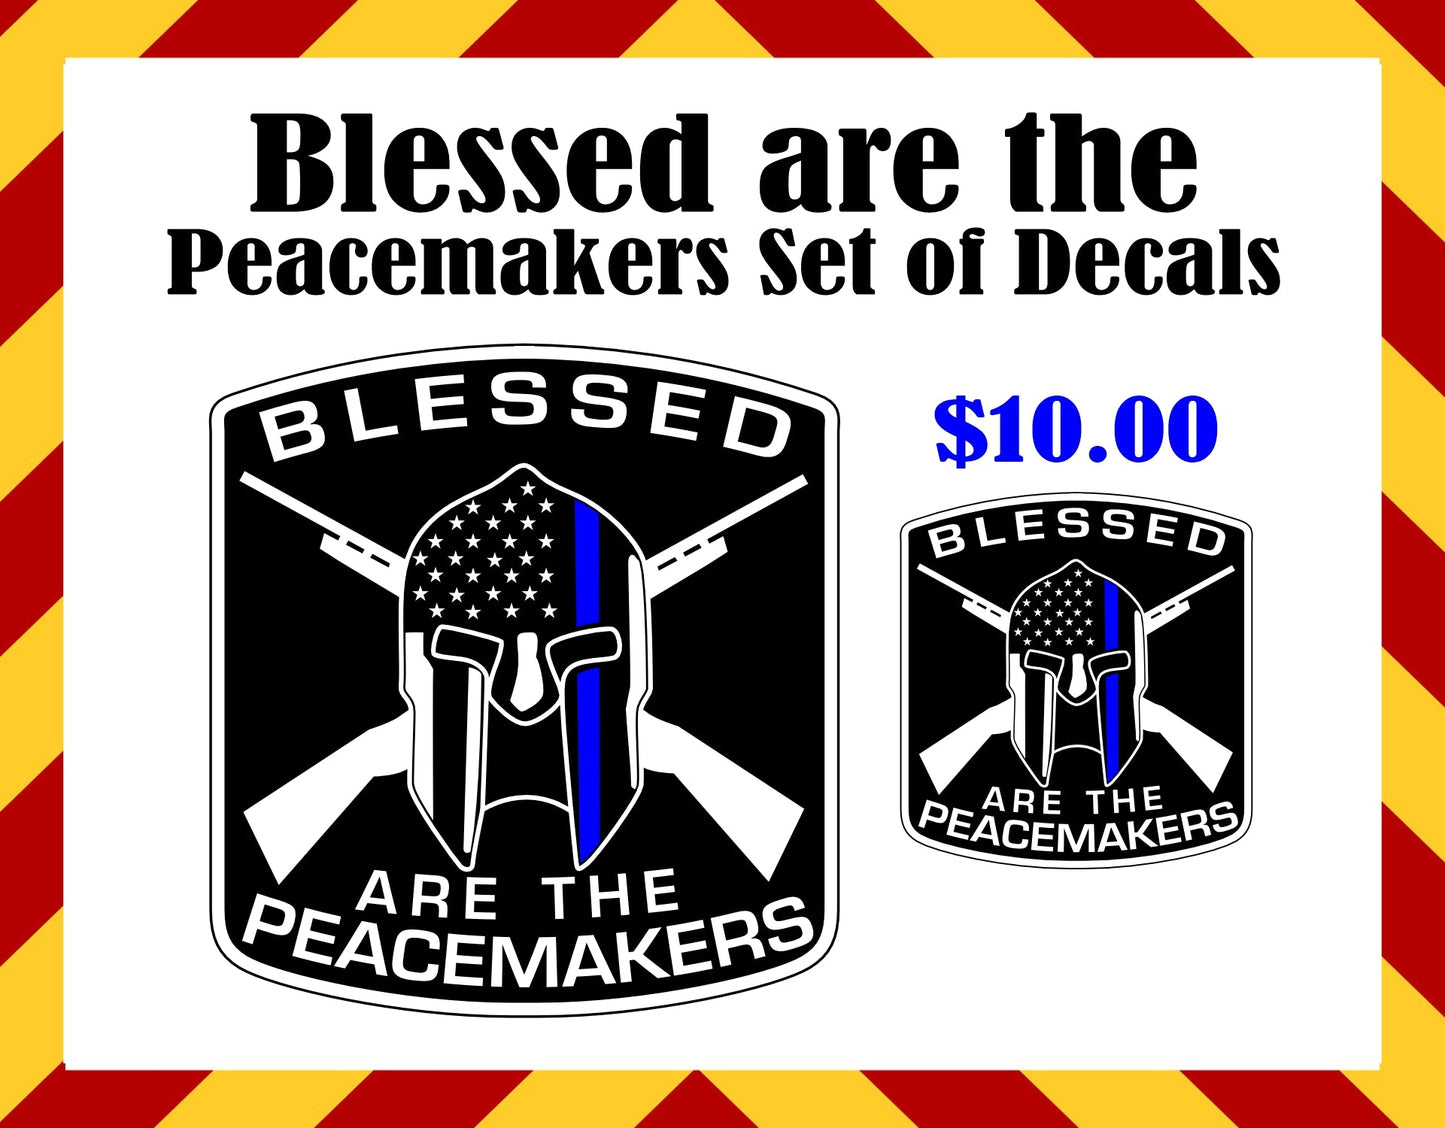 Window Decals - Blessed are the Peacemakers Decals